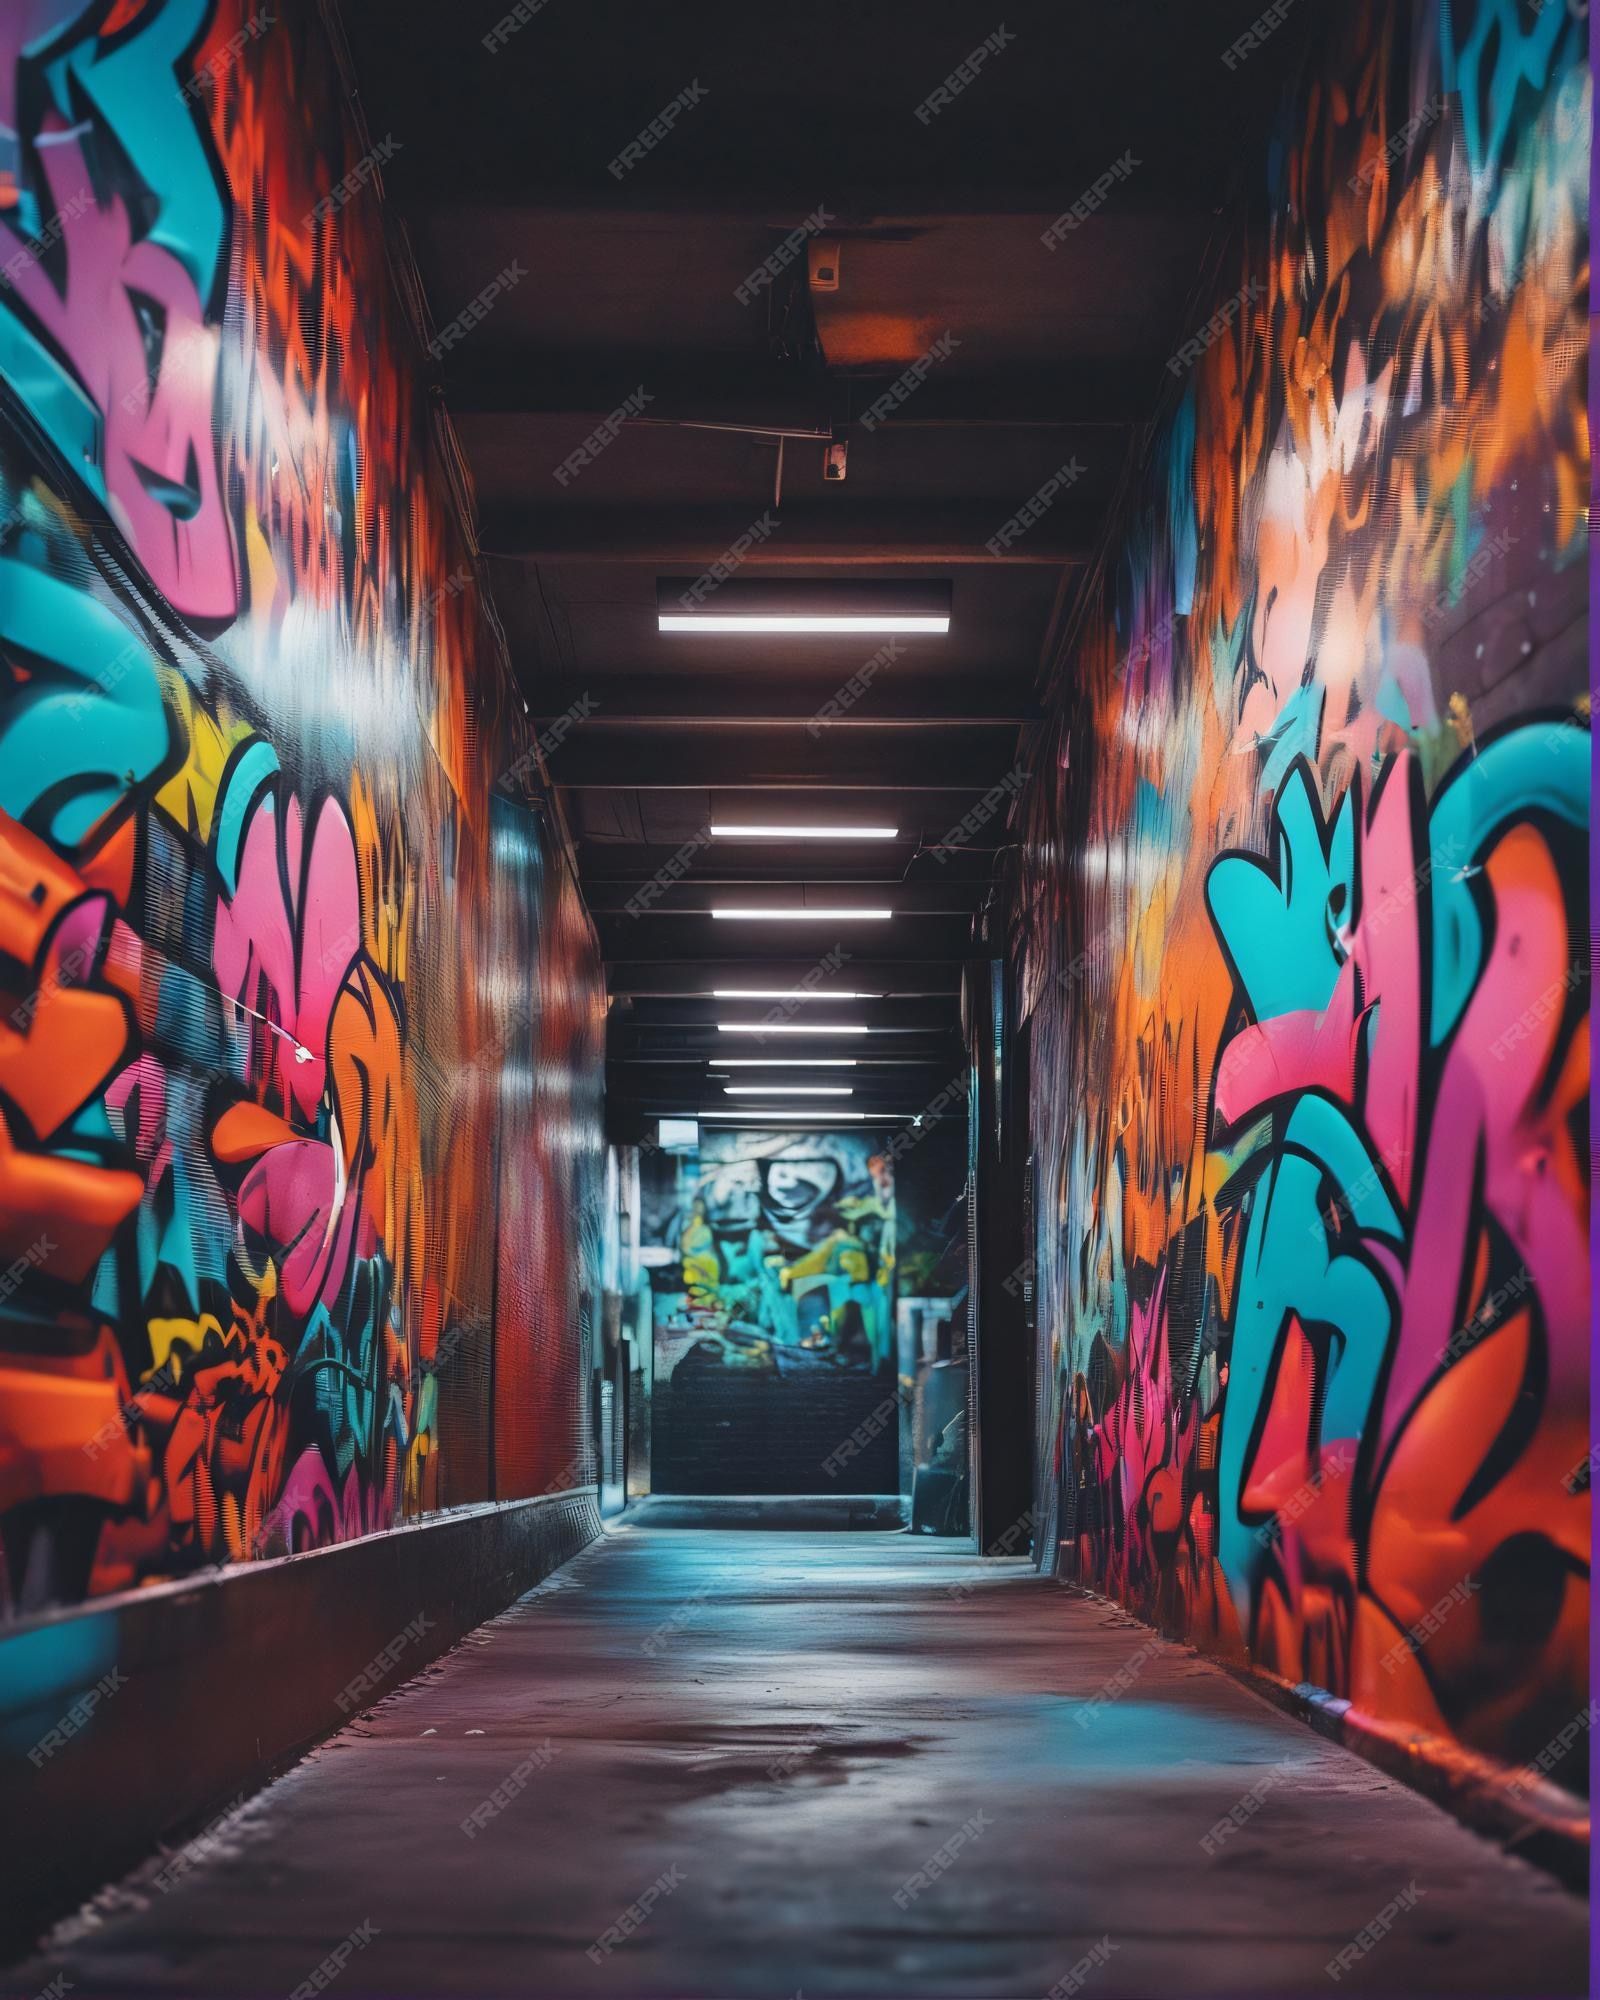 A dark alleyway with colorful graffiti on the walls - Graffiti